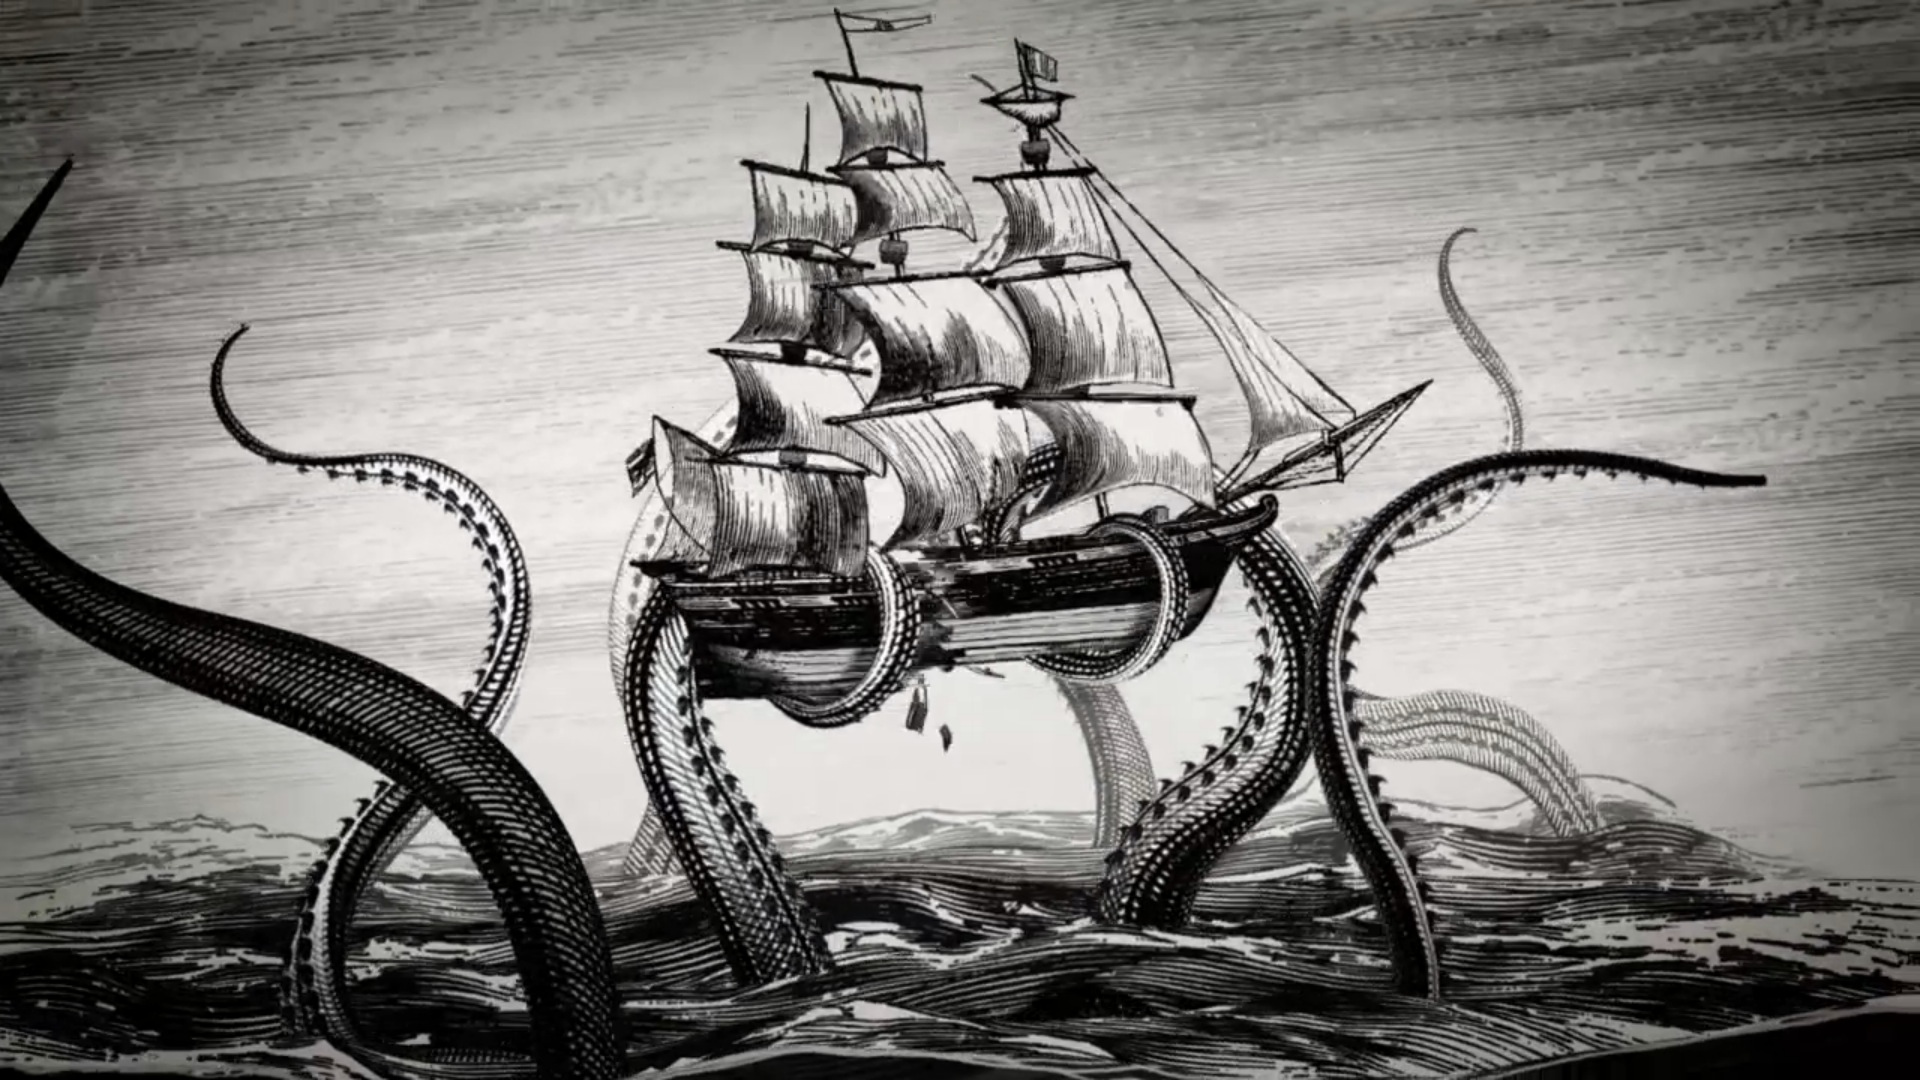 Black and white Victorian looking picture of a kraken with only its legs visible above water holding a ship aloft